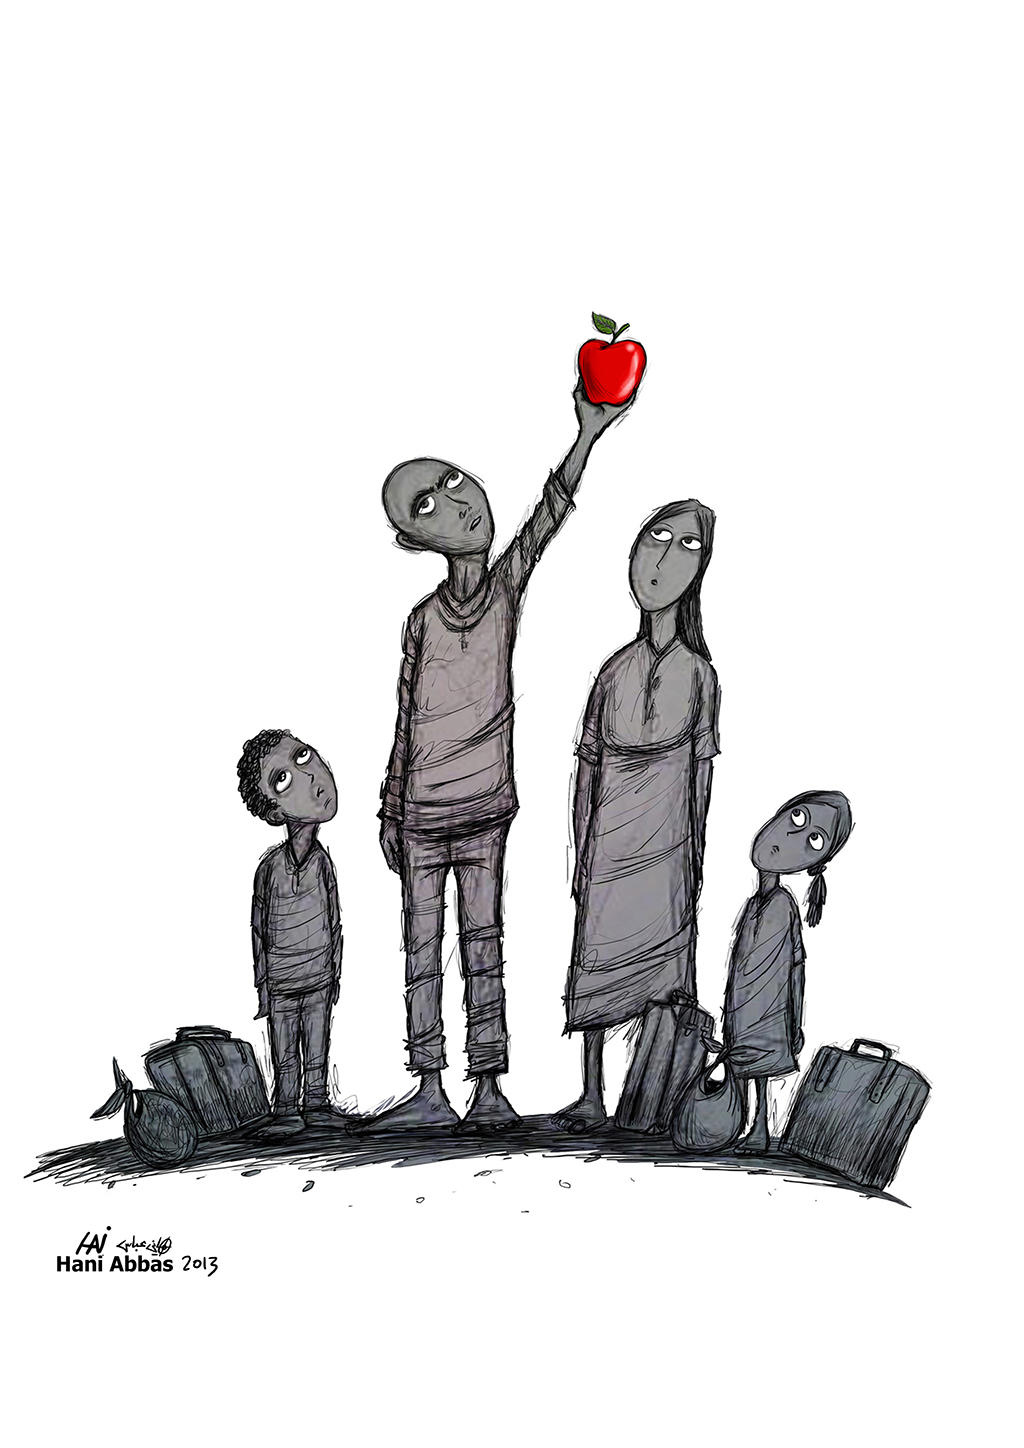 caricature of a family the eldest holding a piece of fruit in the air